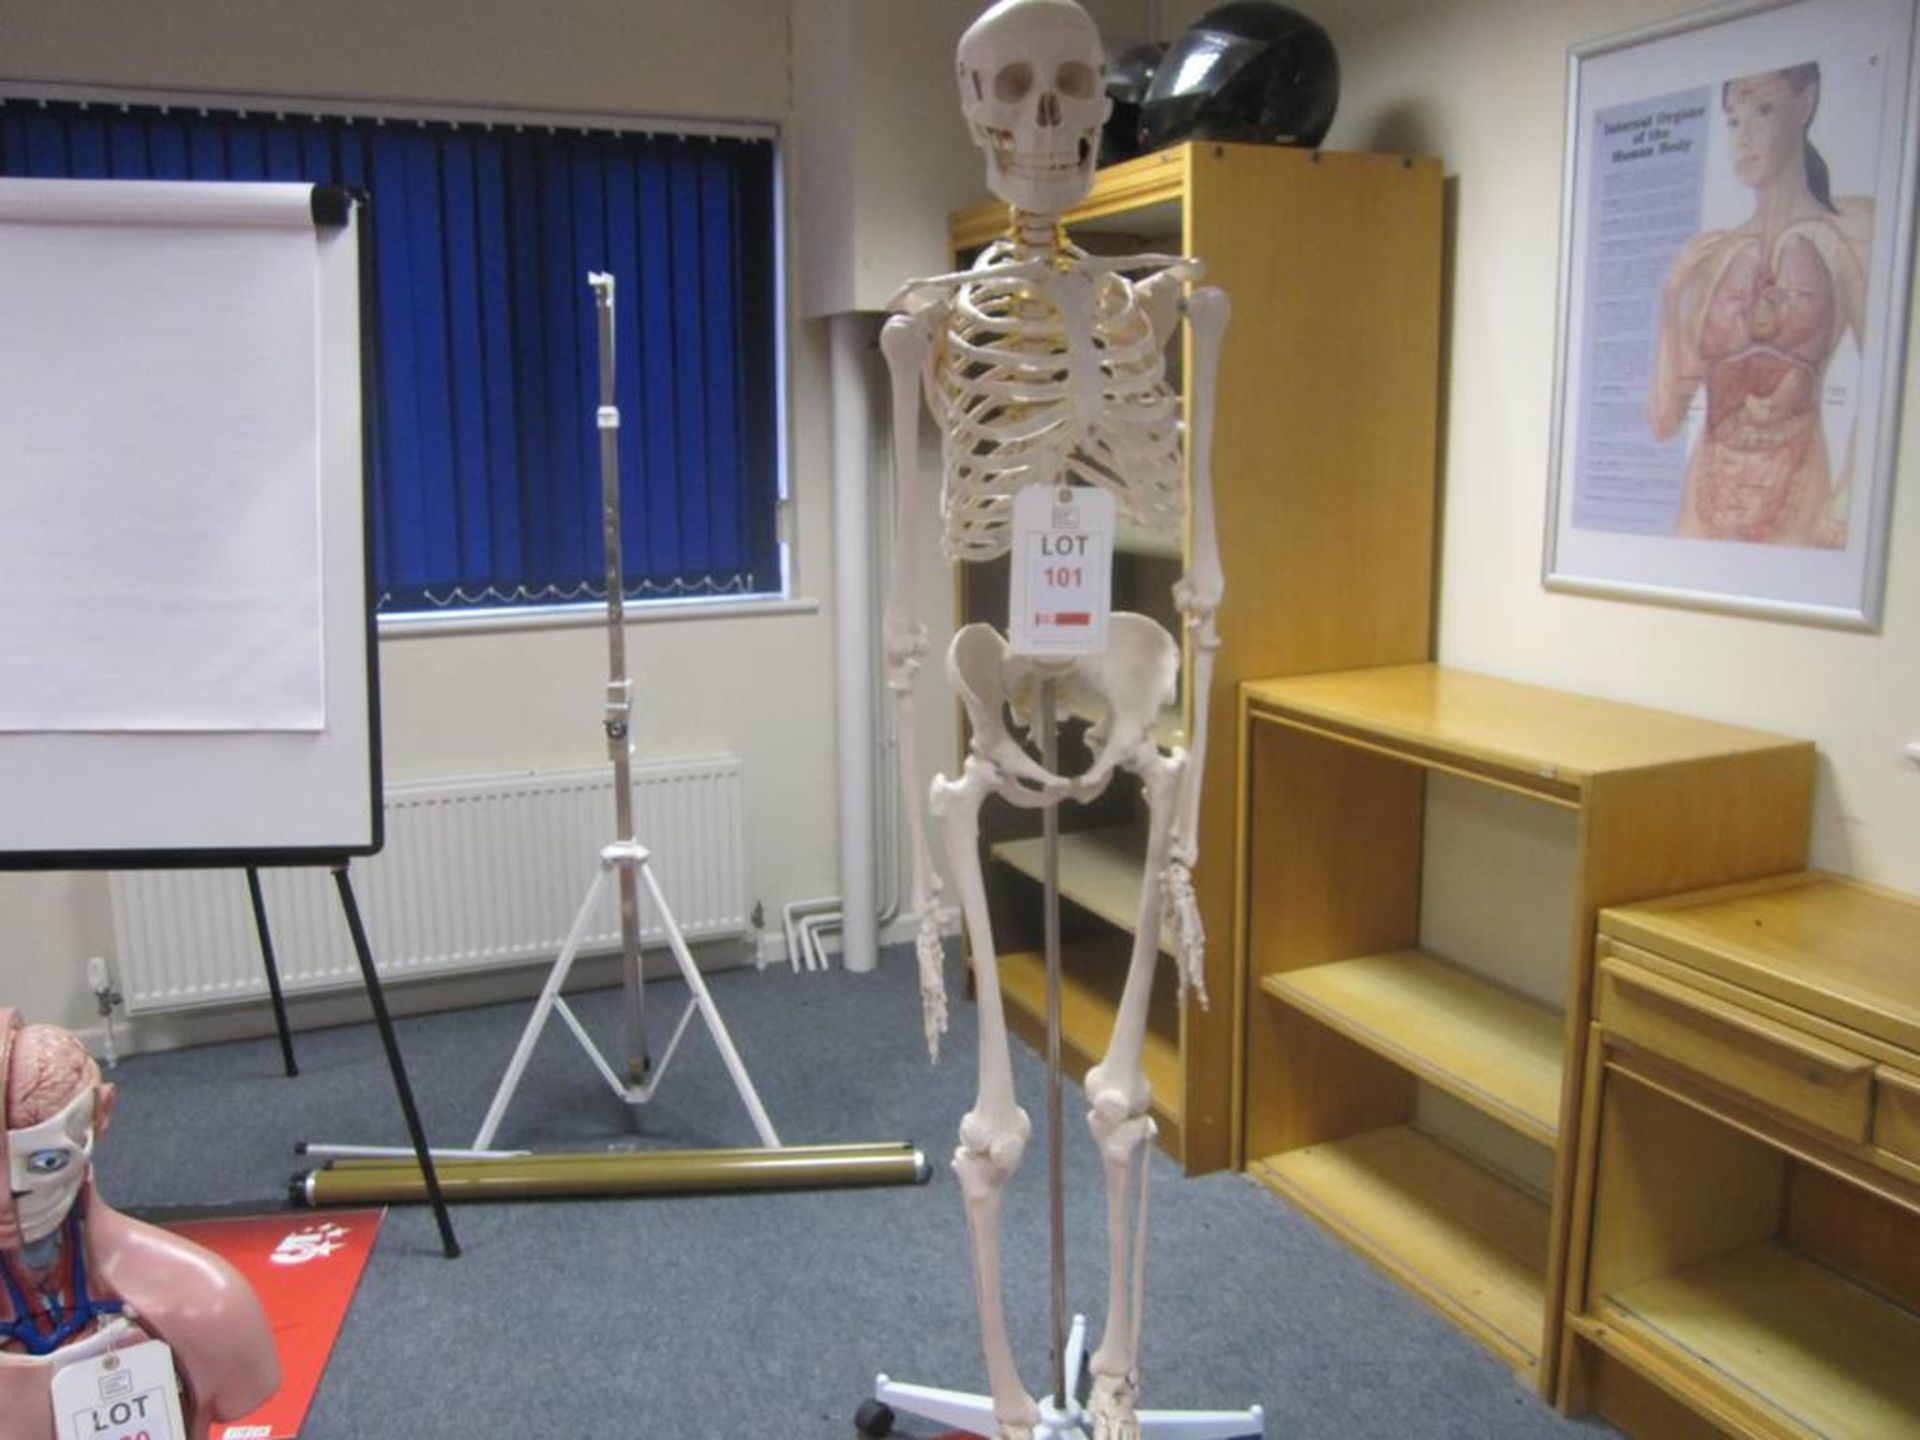 First Aid training model of human skeleton mounted on mobile stand - Image 2 of 2